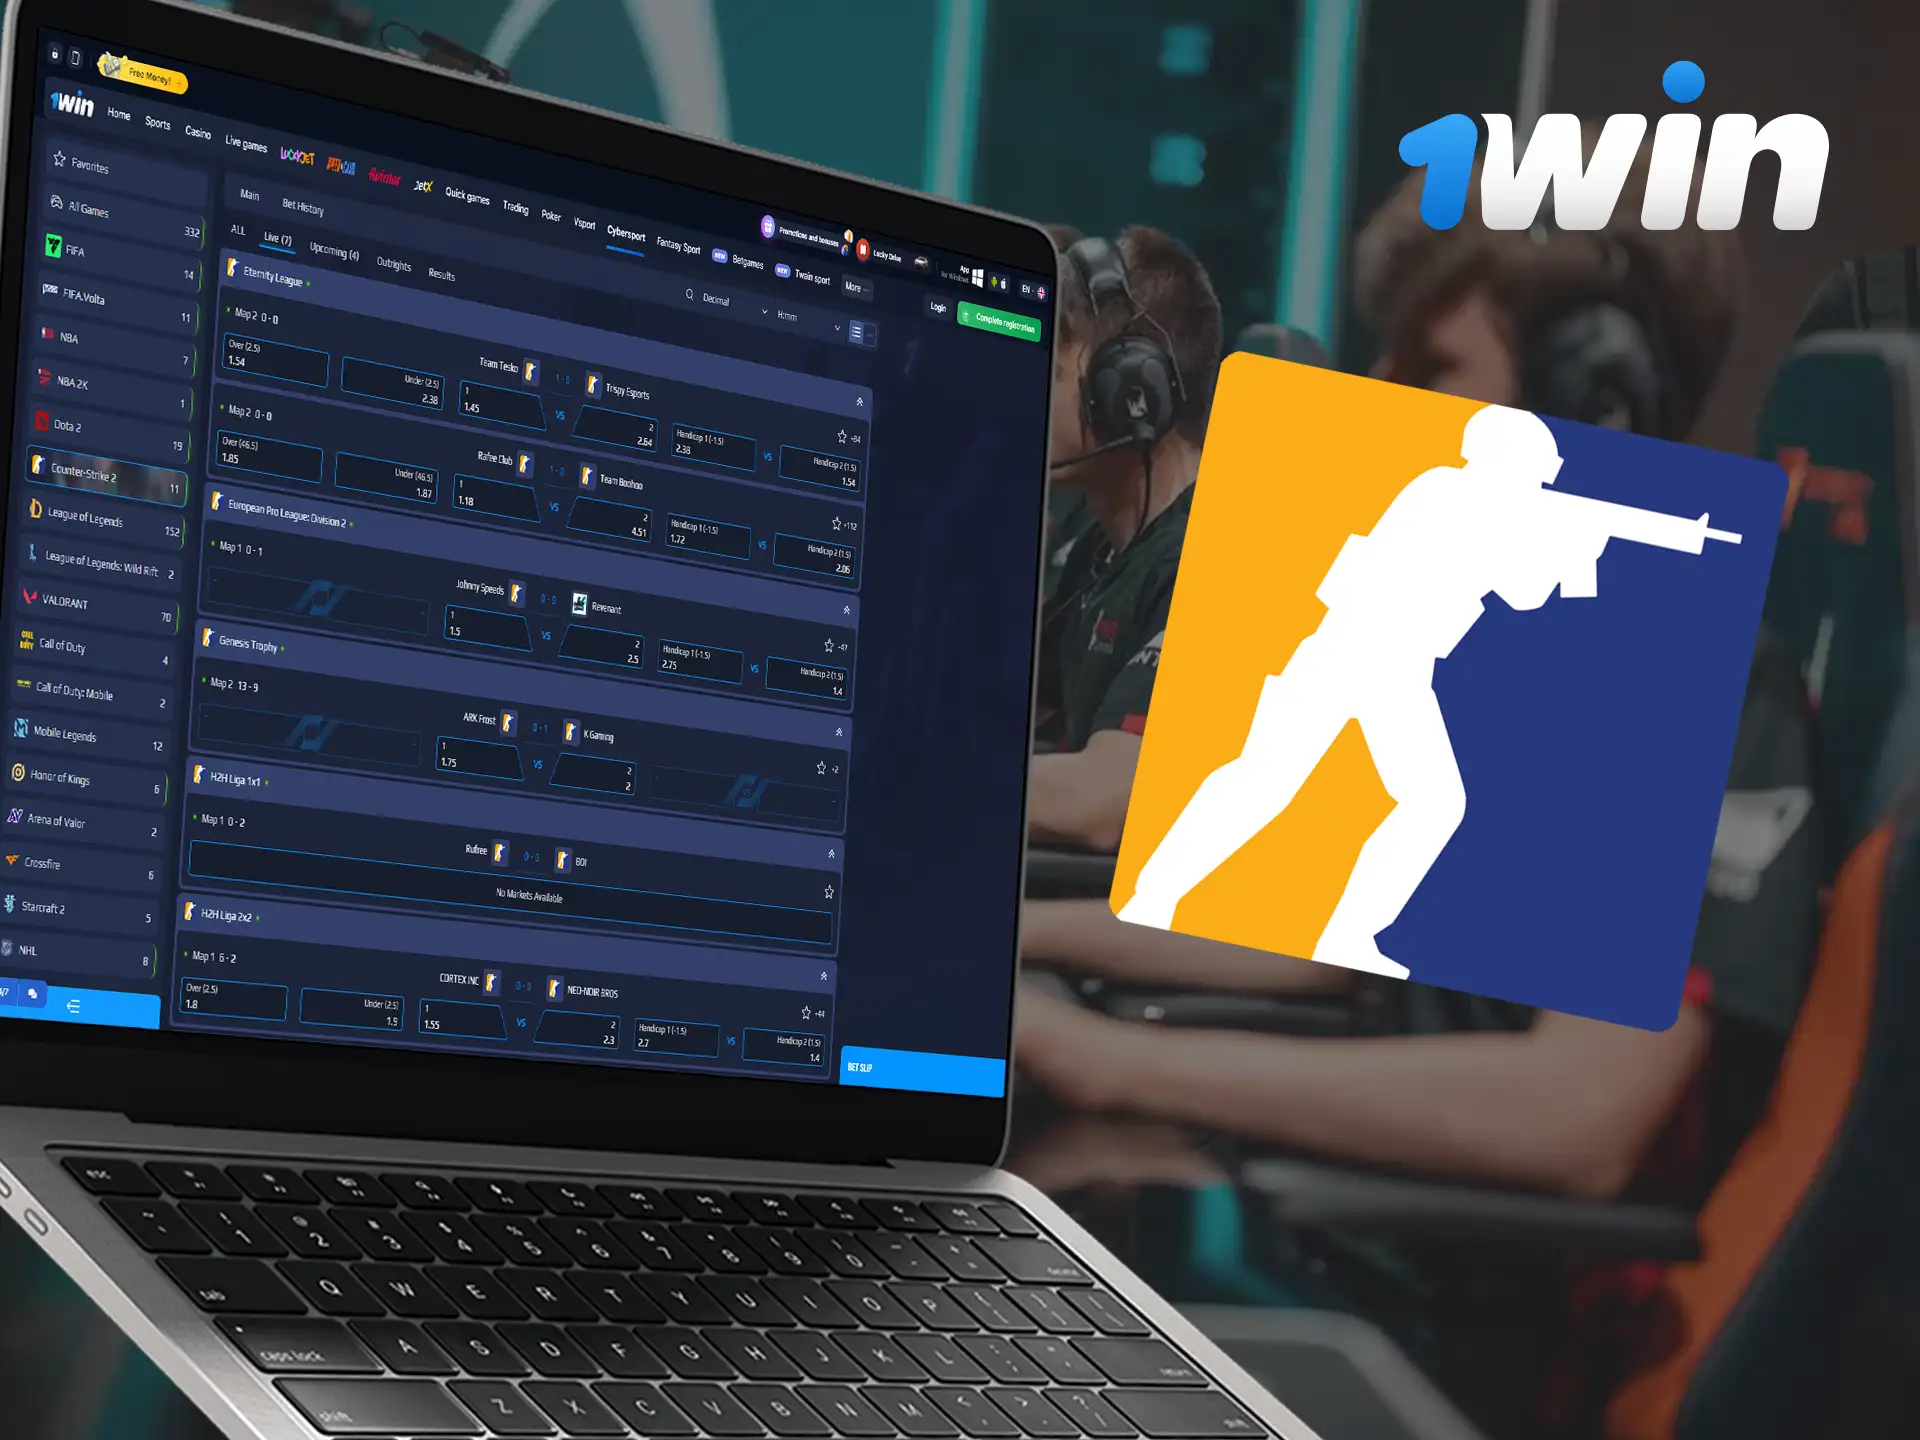 1Win allows Counter-Strike fans to bet and follow their favorite teams.